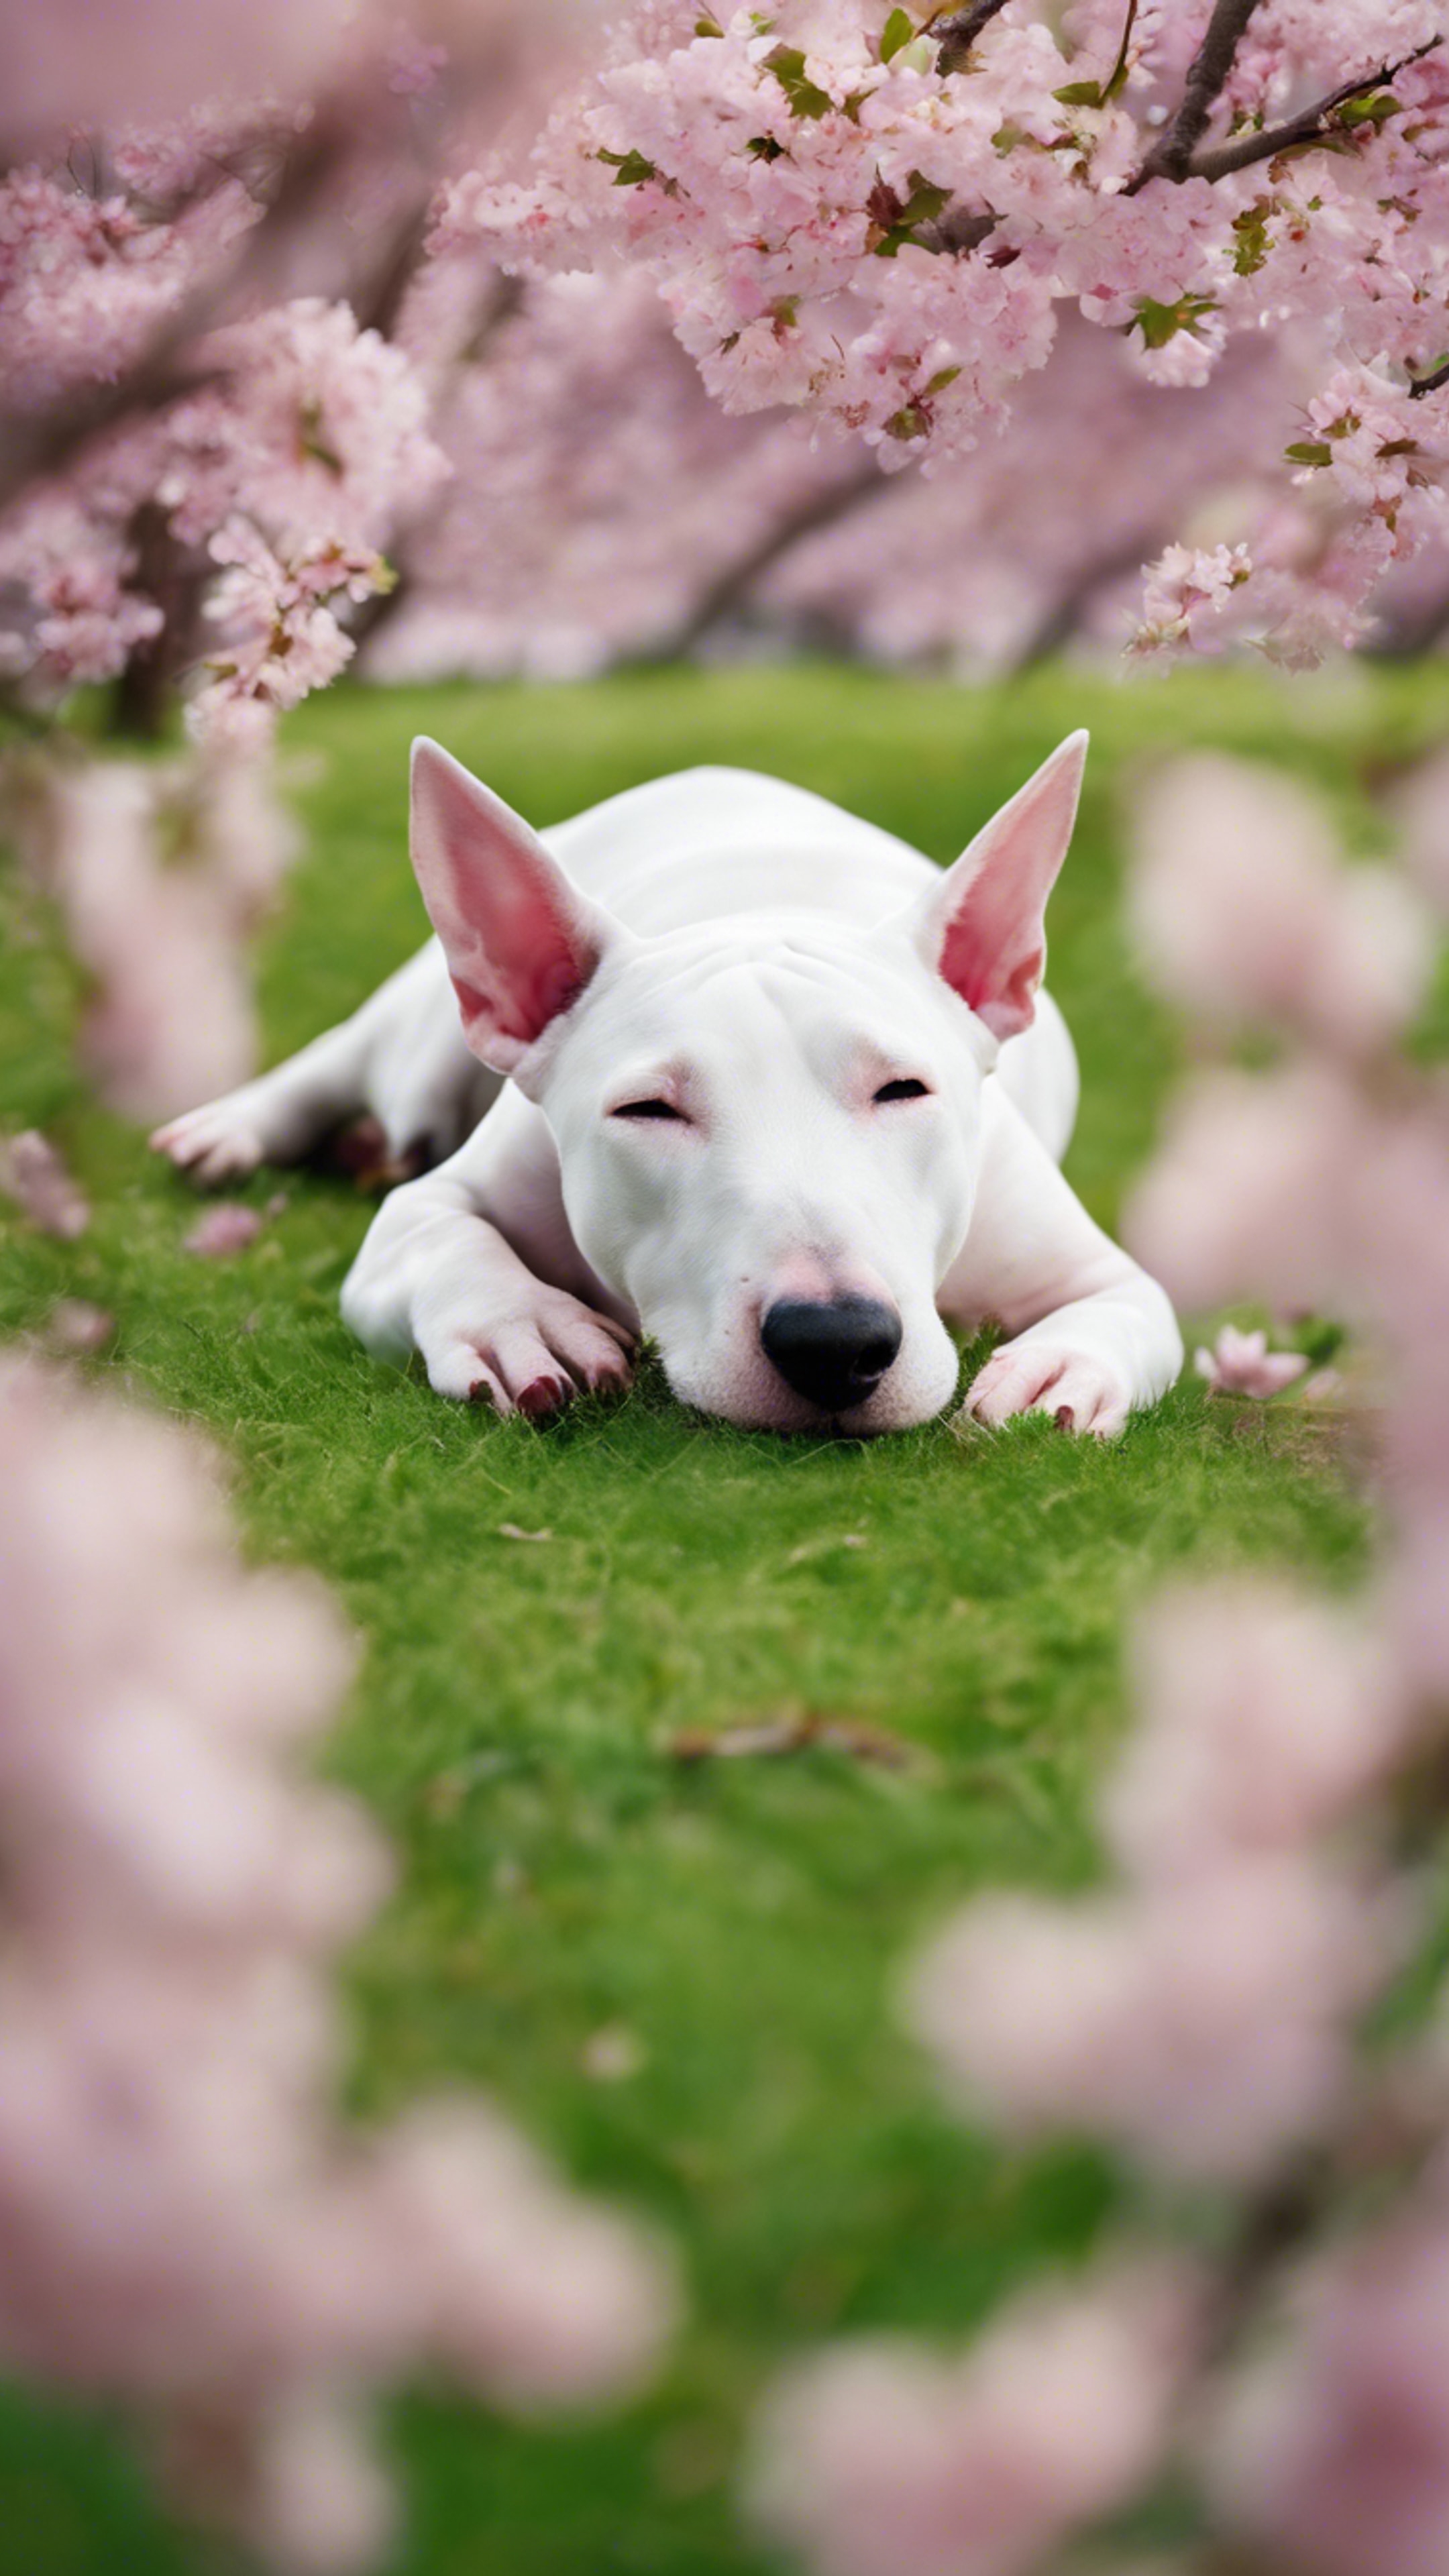 A Bull Terrier curled into a ball, sleeping in a bright green city park at the base of a cherry blossom tree. Tapeta[3df408a3b3f7480298db]